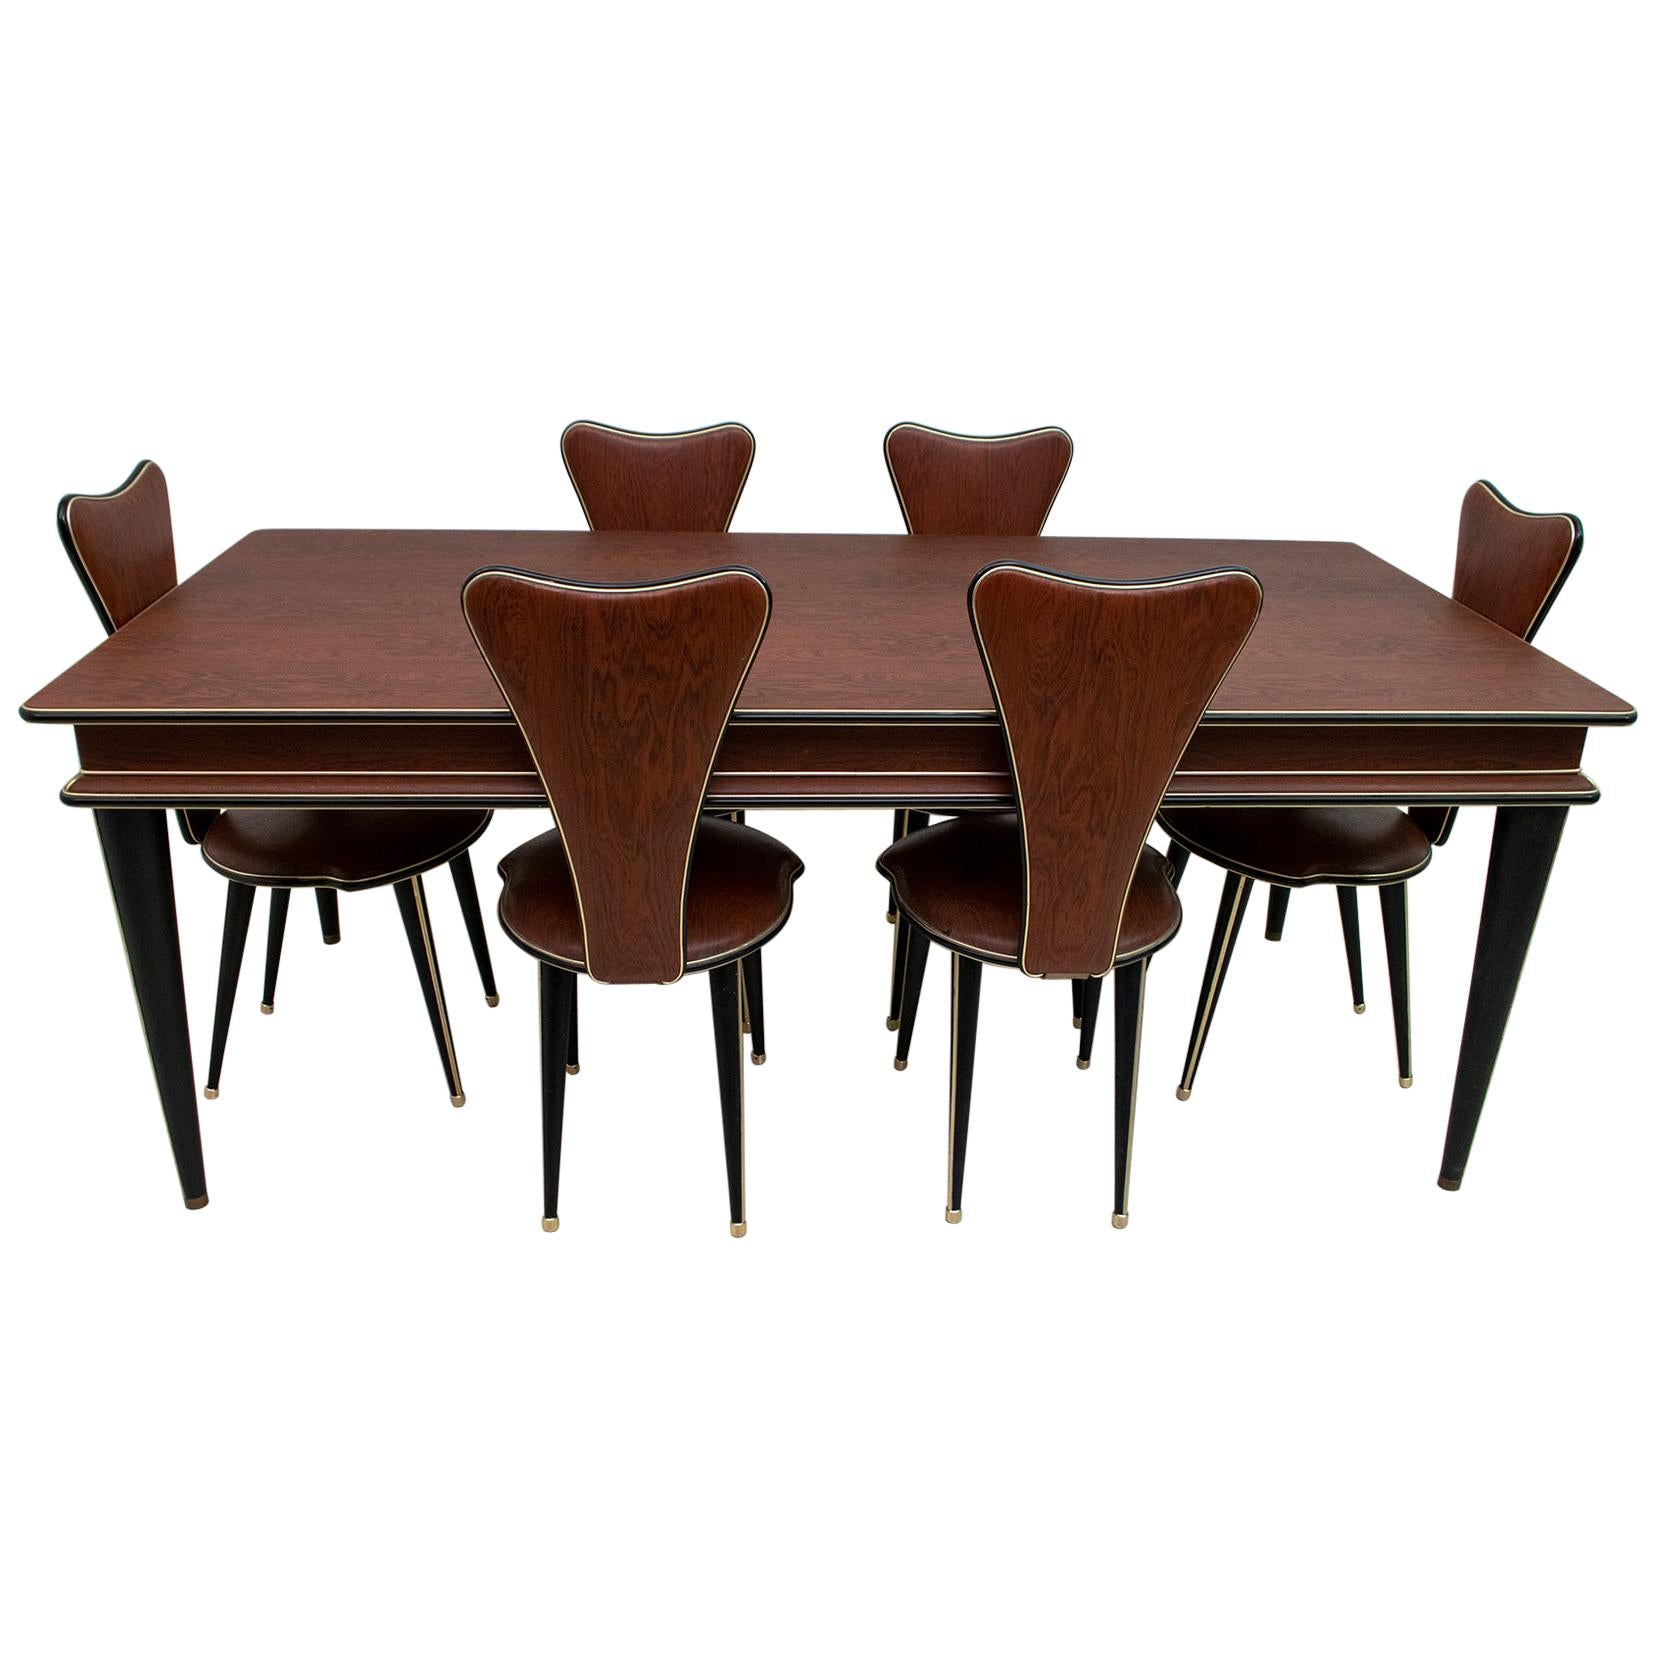 Umberto Mascagni for Harrods Mid-Century Italian Dining Table and 6 Chairs, 50s